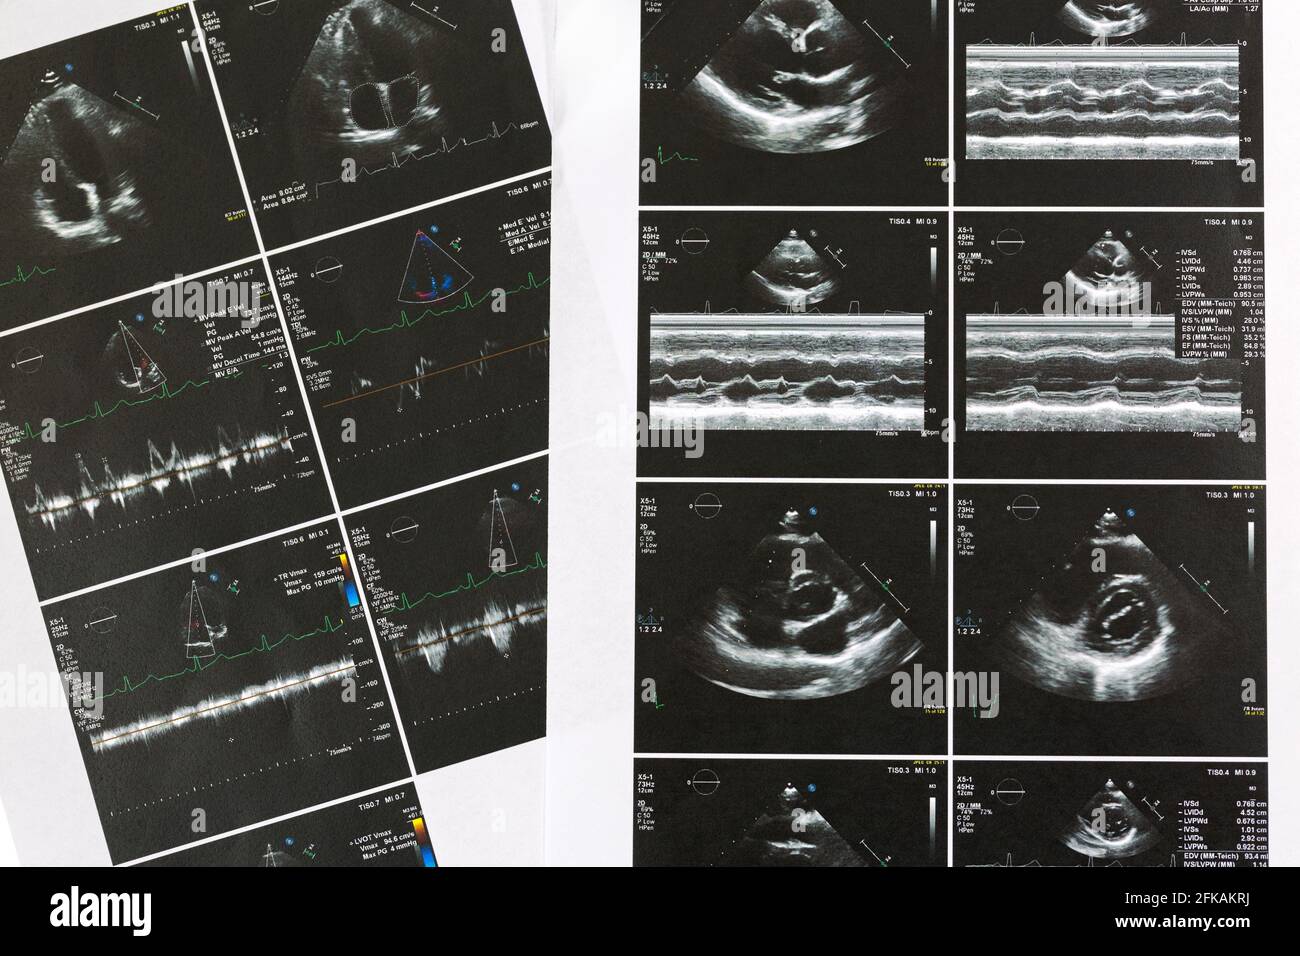 Printed set result paper of heart ultrasound scan examination. Echo cardiography examine for irregular heart beats, abnormal rhythm (arrhythmia) Stock Photo